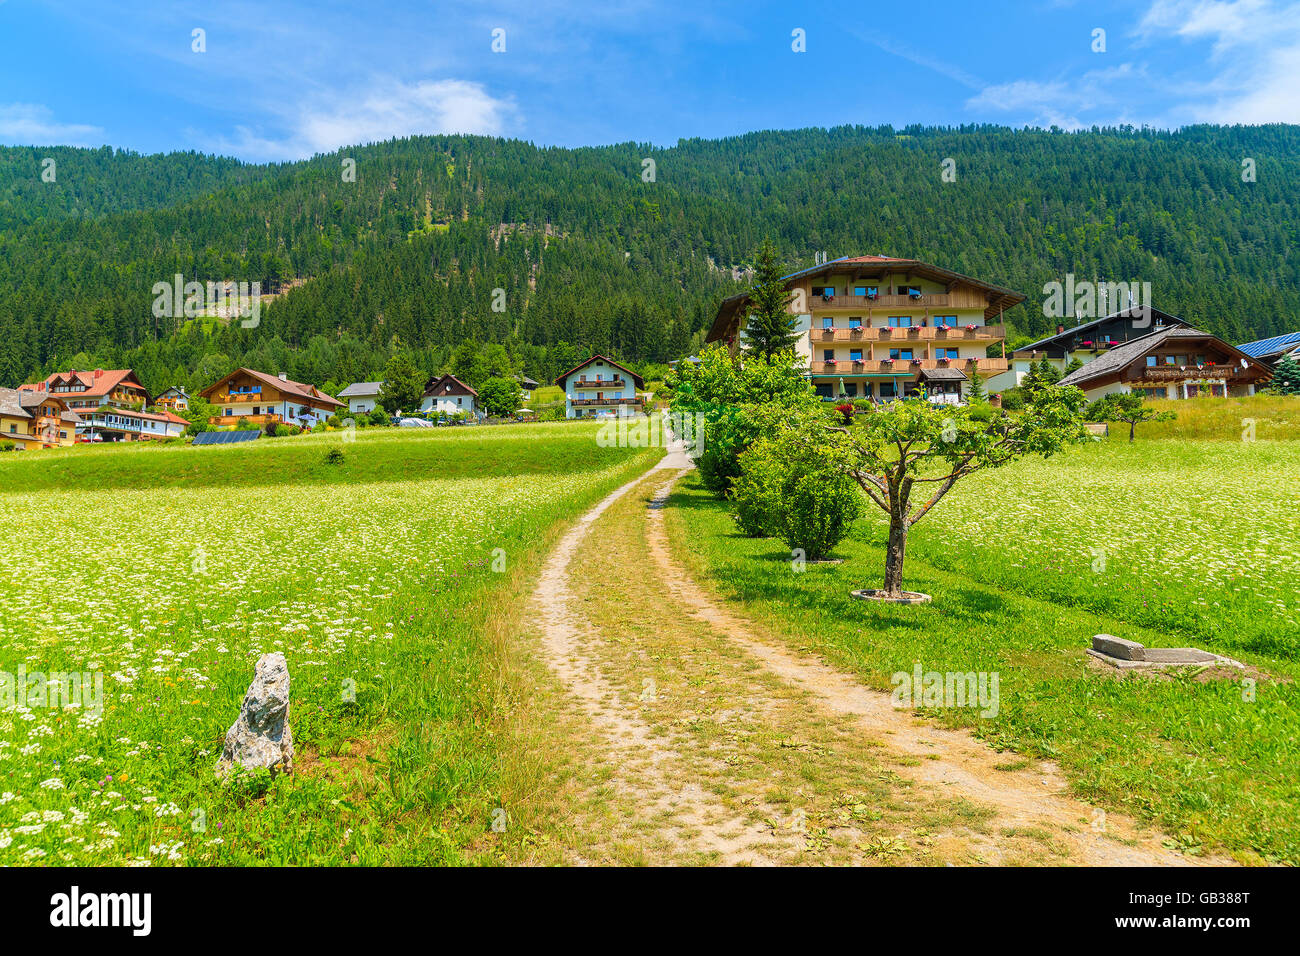 Rural road on green meadow with flowers with traditional countryside houses in background, Weissensee lake, Alps Mountains, Aust Stock Photo